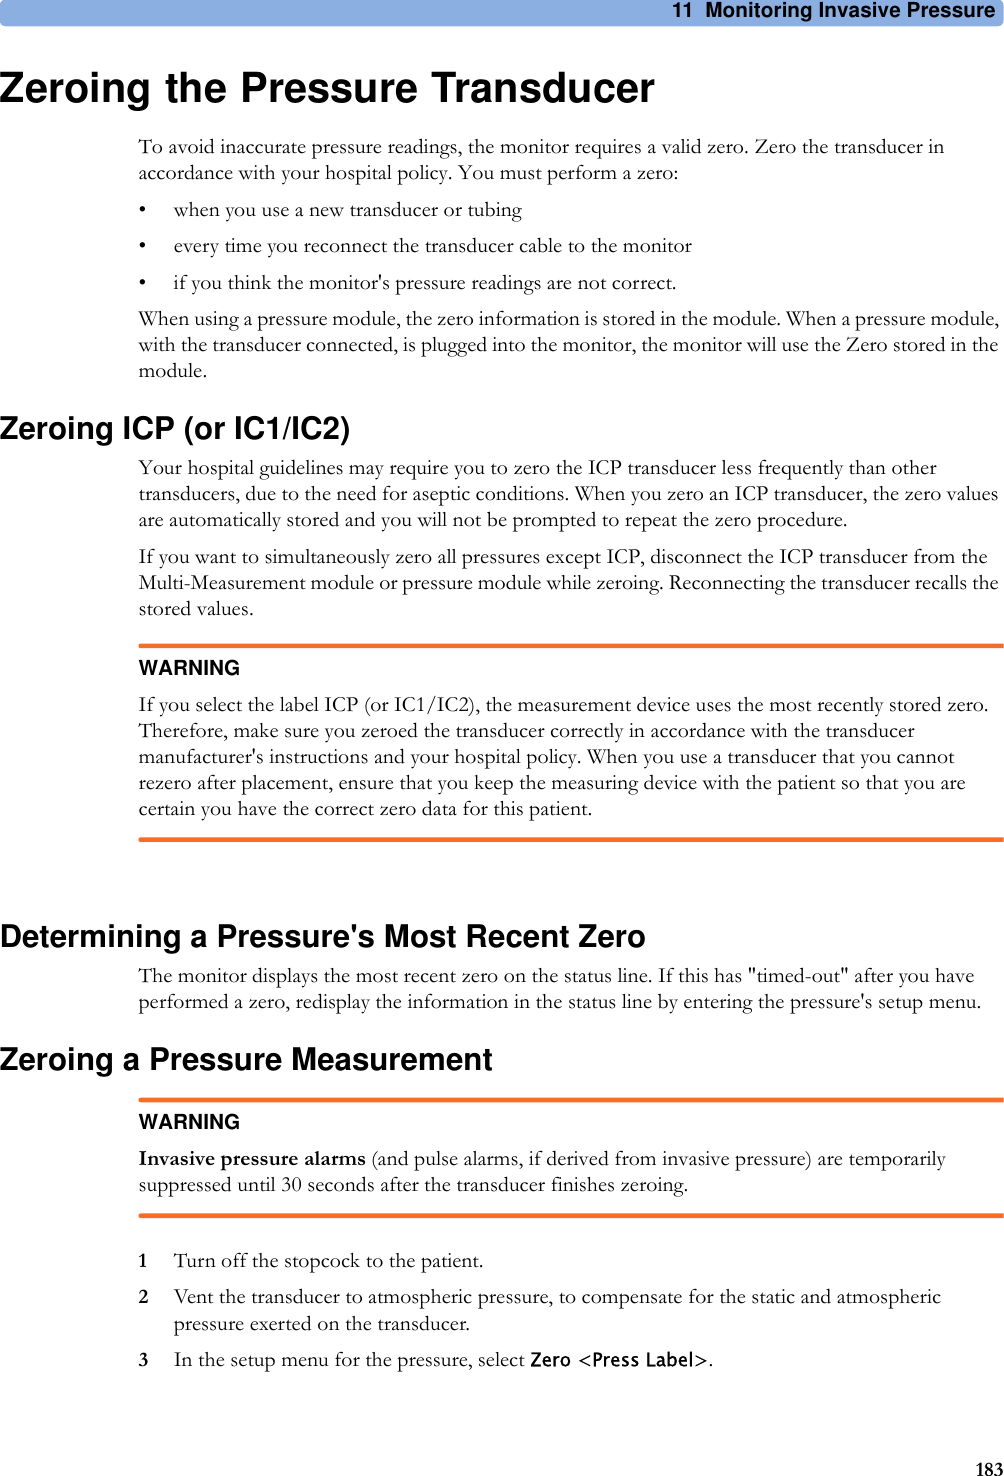 11 Monitoring Invasive Pressure183Zeroing the Pressure TransducerTo avoid inaccurate pressure readings, the monitor requires a valid zero. Zero the transducer in accordance with your hospital policy. You must perform a zero:• when you use a new transducer or tubing• every time you reconnect the transducer cable to the monitor• if you think the monitor&apos;s pressure readings are not correct.When using a pressure module, the zero information is stored in the module. When a pressure module, with the transducer connected, is plugged into the monitor, the monitor will use the Zero stored in the module.Zeroing ICP (or IC1/IC2)Your hospital guidelines may require you to zero the ICP transducer less frequently than other transducers, due to the need for aseptic conditions. When you zero an ICP transducer, the zero values are automatically stored and you will not be prompted to repeat the zero procedure.If you want to simultaneously zero all pressures except ICP, disconnect the ICP transducer from the Multi-Measurement module or pressure module while zeroing. Reconnecting the transducer recalls the stored values.WARNINGIf you select the label ICP (or IC1/IC2), the measurement device uses the most recently stored zero. Therefore, make sure you zeroed the transducer correctly in accordance with the transducer manufacturer&apos;s instructions and your hospital policy. When you use a transducer that you cannot rezero after placement, ensure that you keep the measuring device with the patient so that you are certain you have the correct zero data for this patient.Determining a Pressure&apos;s Most Recent ZeroThe monitor displays the most recent zero on the status line. If this has &quot;timed-out&quot; after you have performed a zero, redisplay the information in the status line by entering the pressure&apos;s setup menu.Zeroing a Pressure MeasurementWARNINGInvasive pressure alarms (and pulse alarms, if derived from invasive pressure) are temporarily suppressed until 30 seconds after the transducer finishes zeroing.1Turn off the stopcock to the patient.2Vent the transducer to atmospheric pressure, to compensate for the static and atmospheric pressure exerted on the transducer.3In the setup menu for the pressure, select Zero &lt;Press Label&gt;.